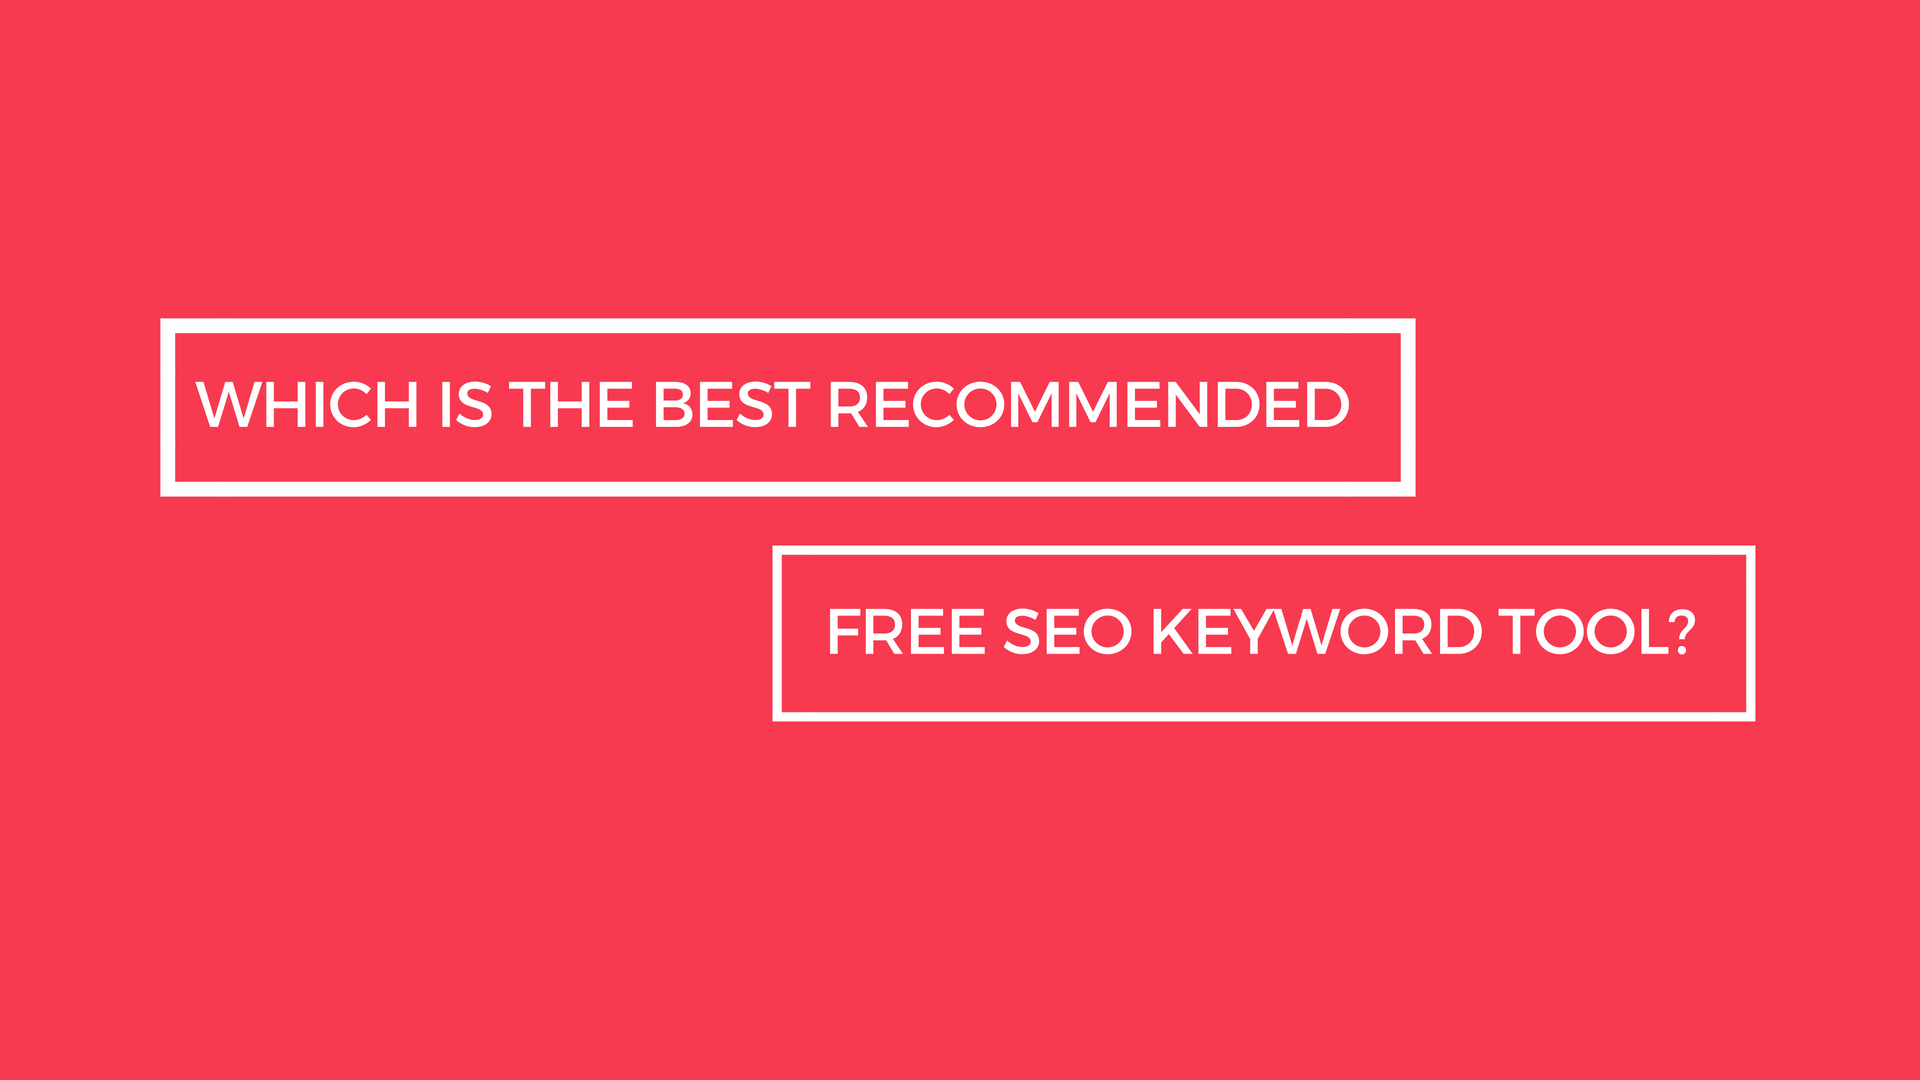 Which is the best recommended free SEO keyword tool?